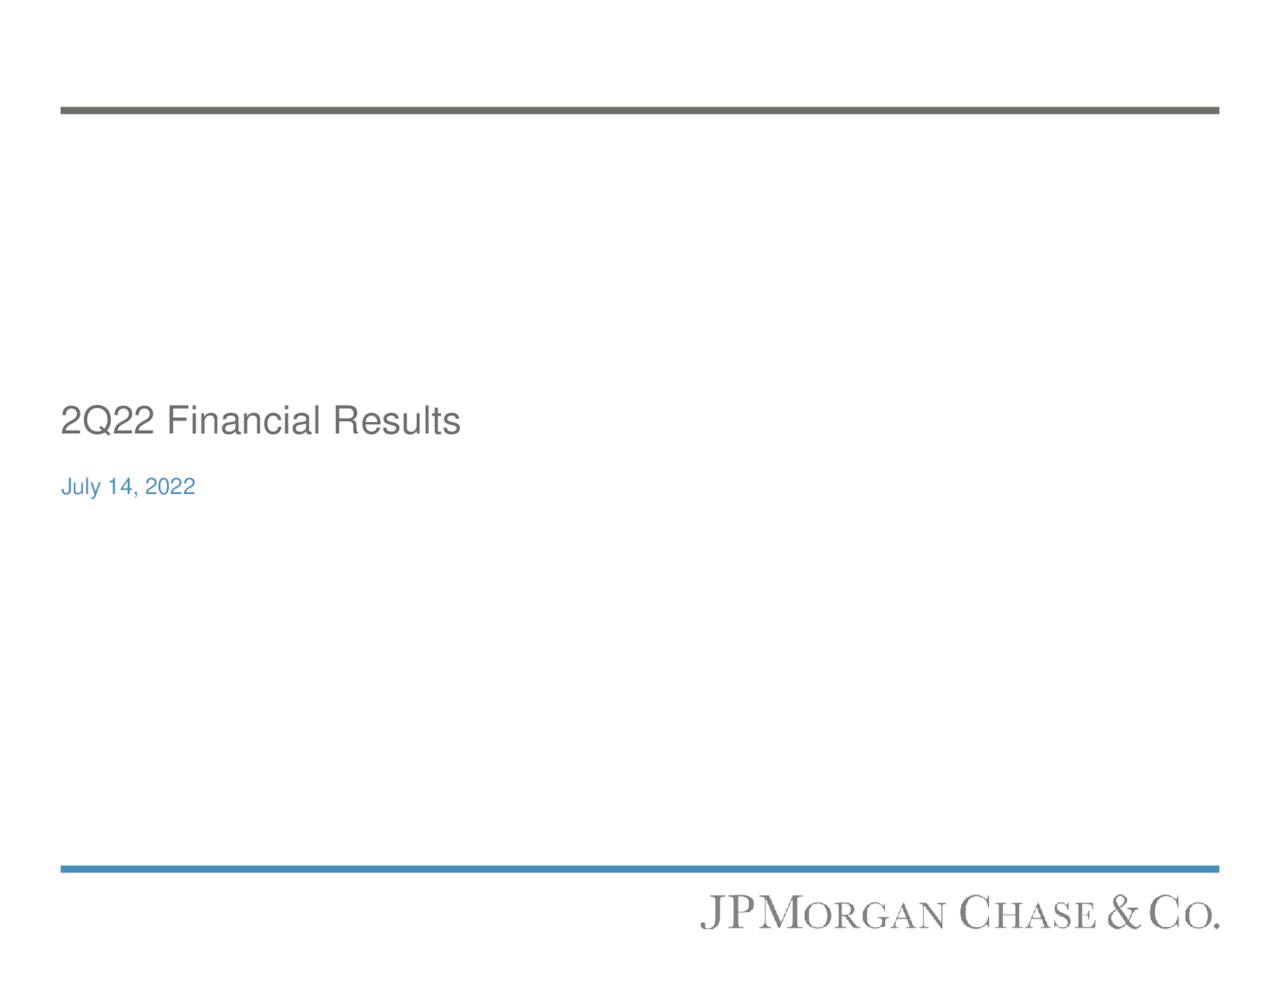 Chase & Co. 2022 Q2 Results Earnings Call Presentation